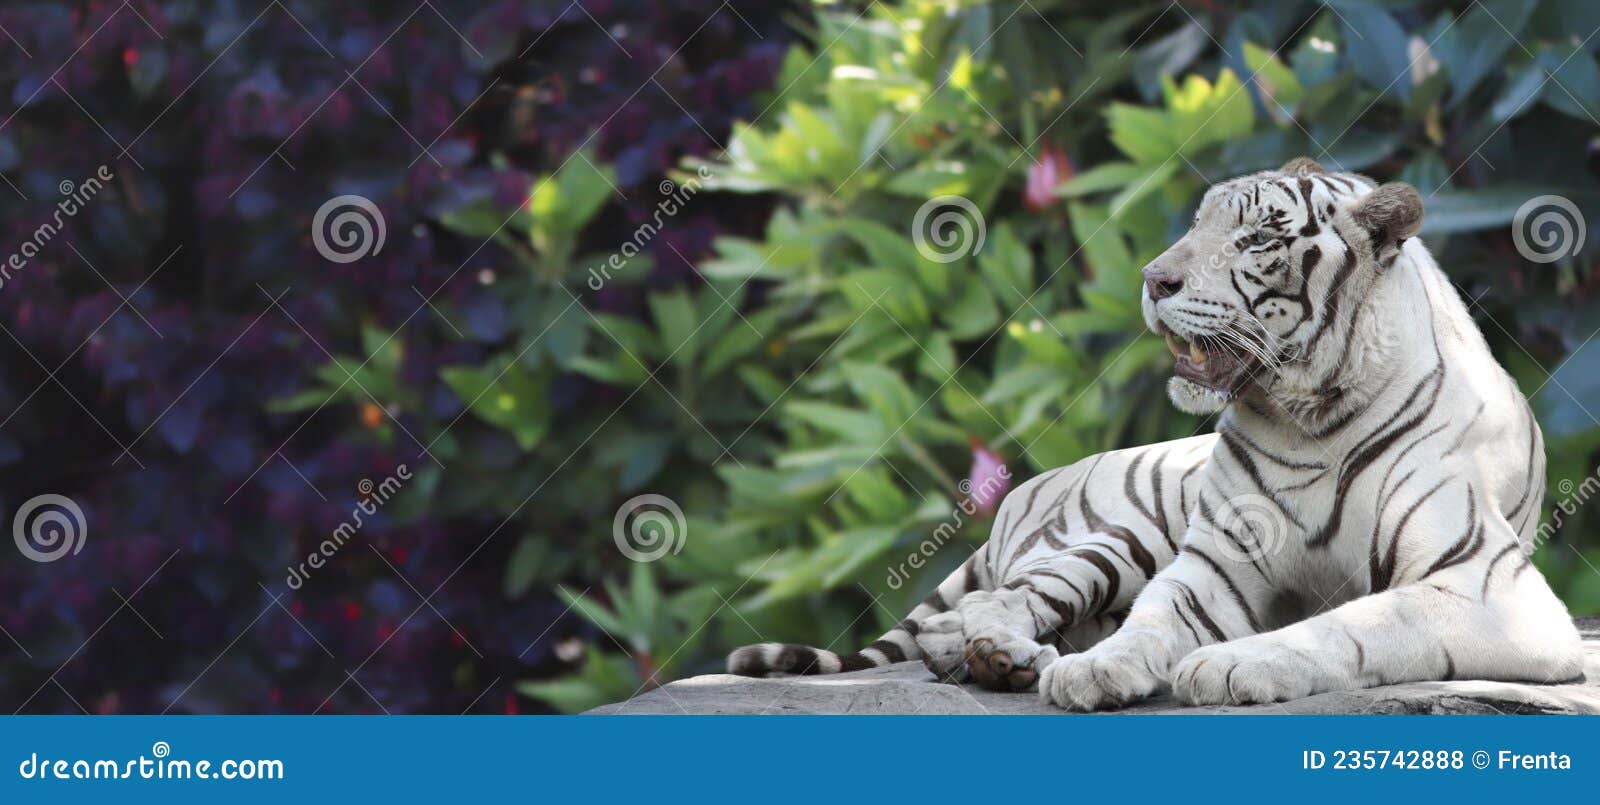 Horizontal Banner with Tropical Plants Leaves and a Lying White Tiger on  Blurred Nature Background Stock Photo - Image of reserve, banner: 235742888